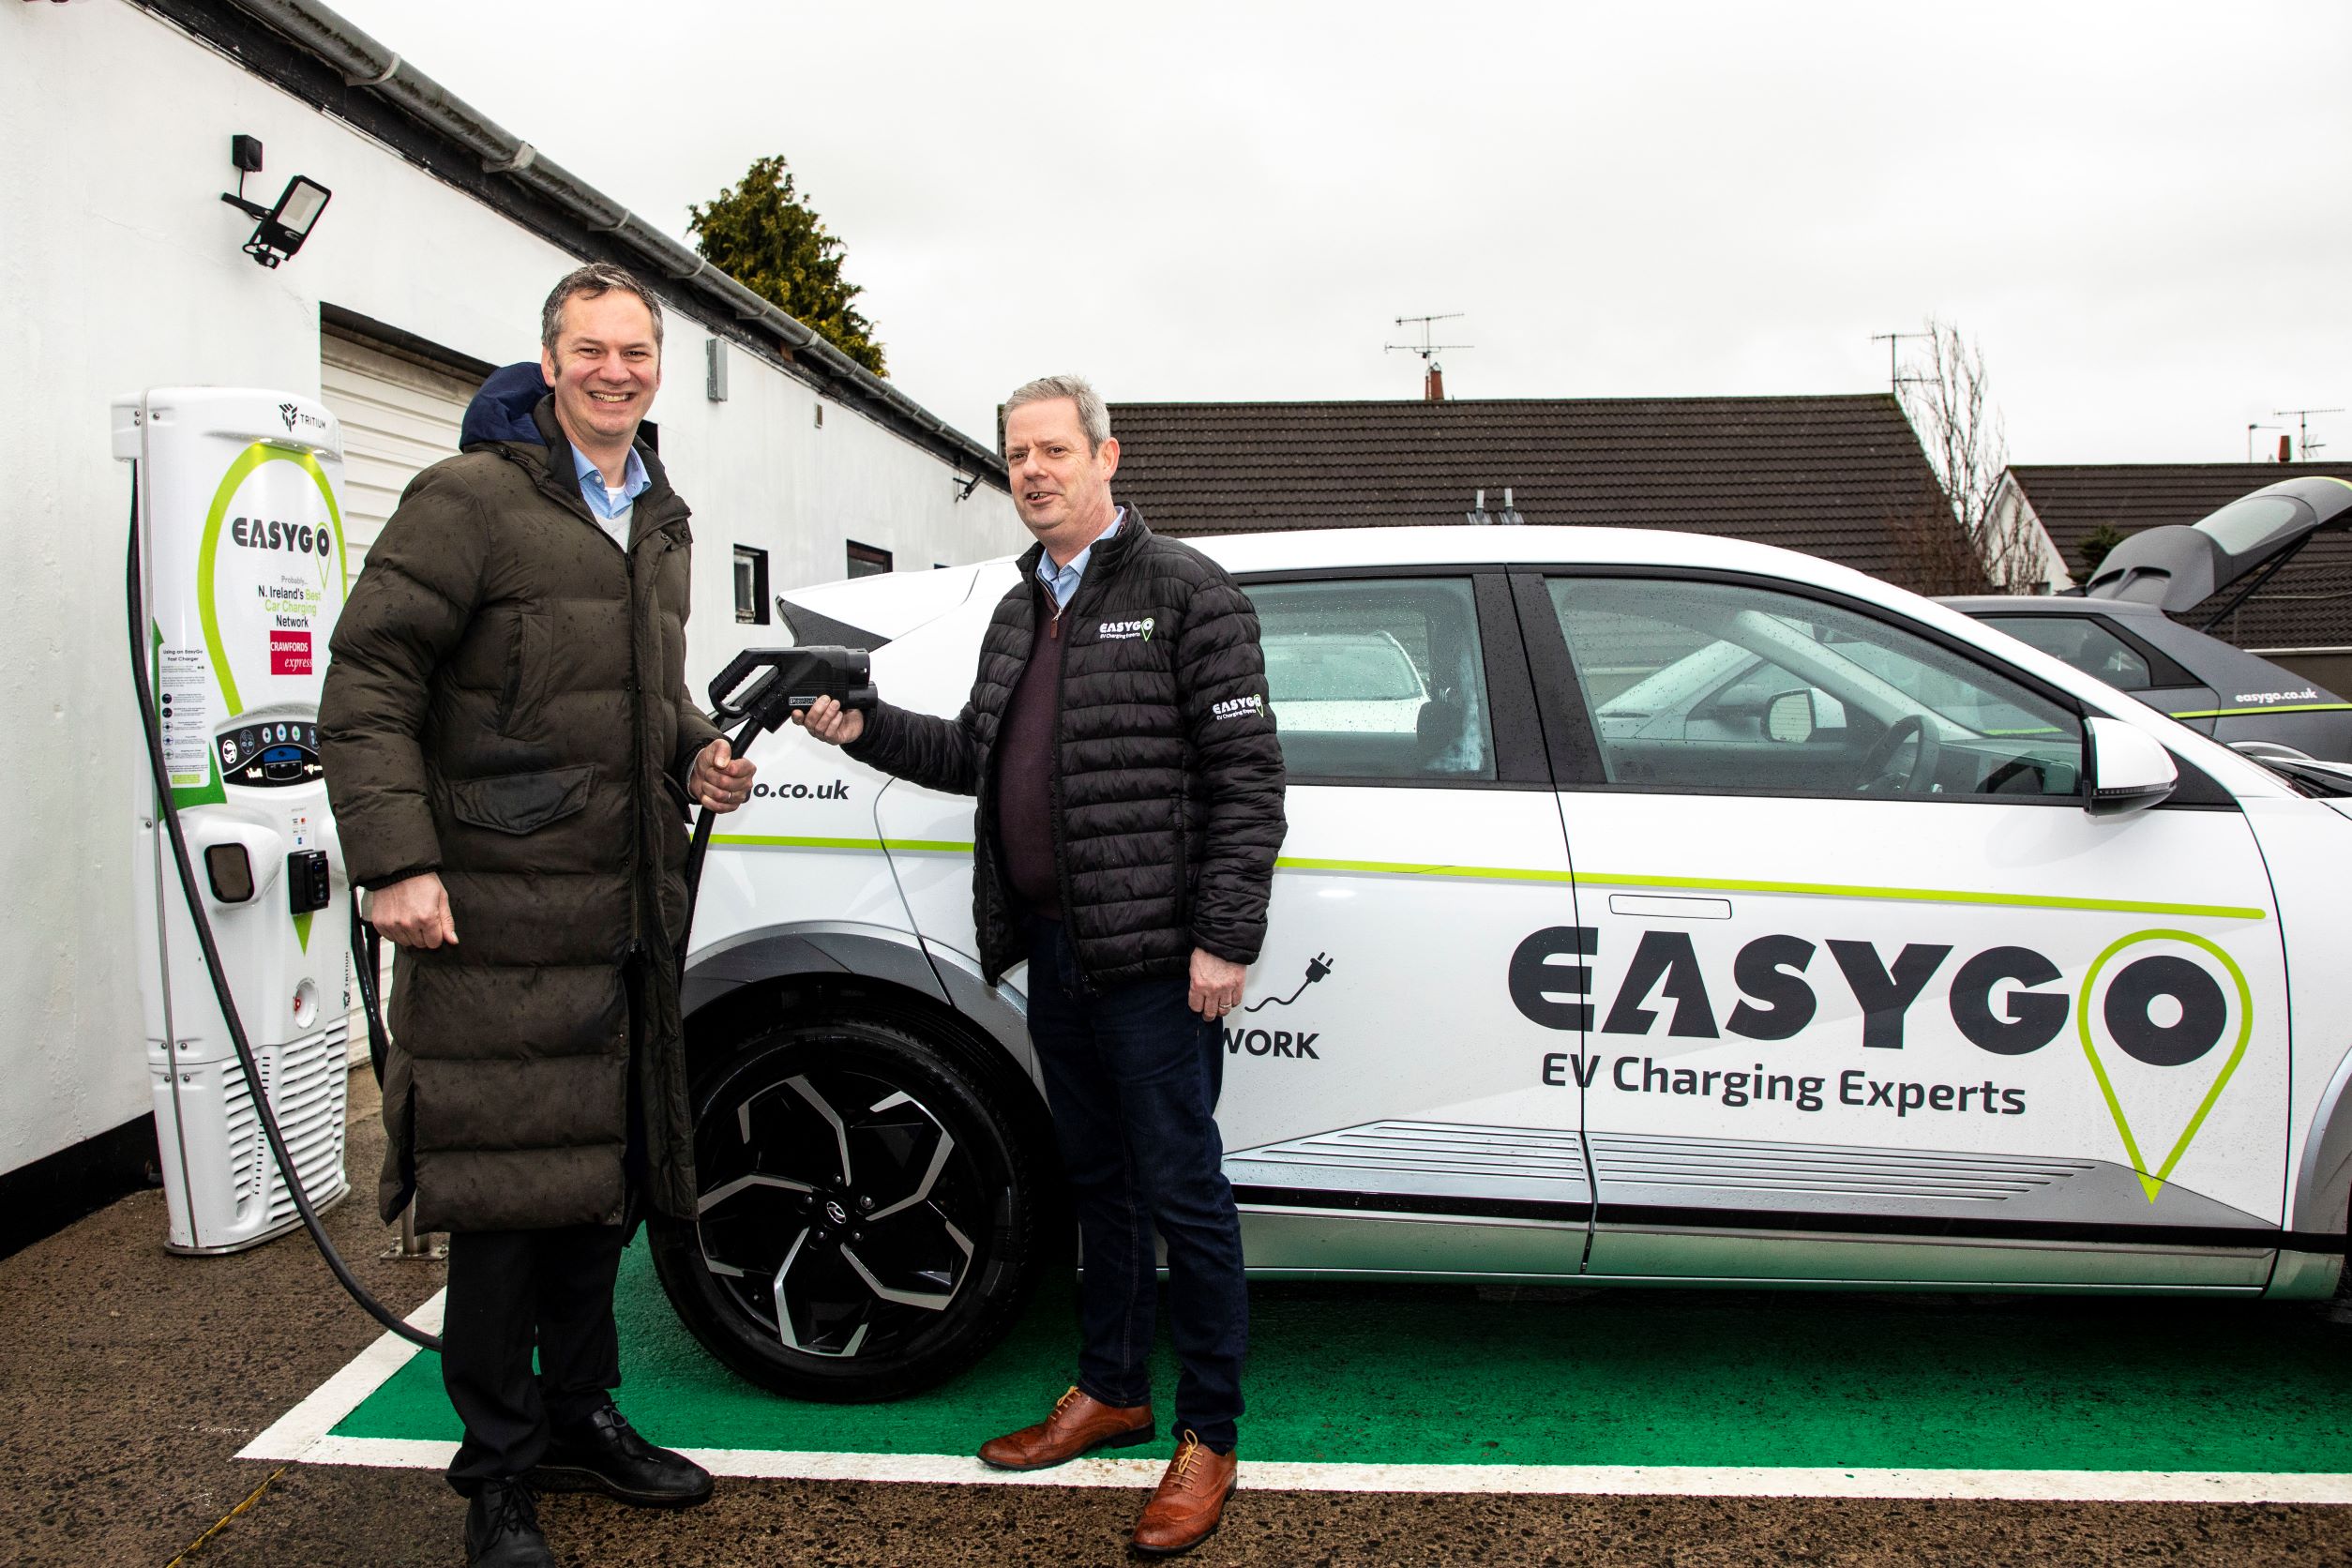 New EasyGo fast-charger with Stephen Kelly unveiled at Crawfords Express. Robert Crawford and Stephen Kelly pictured.